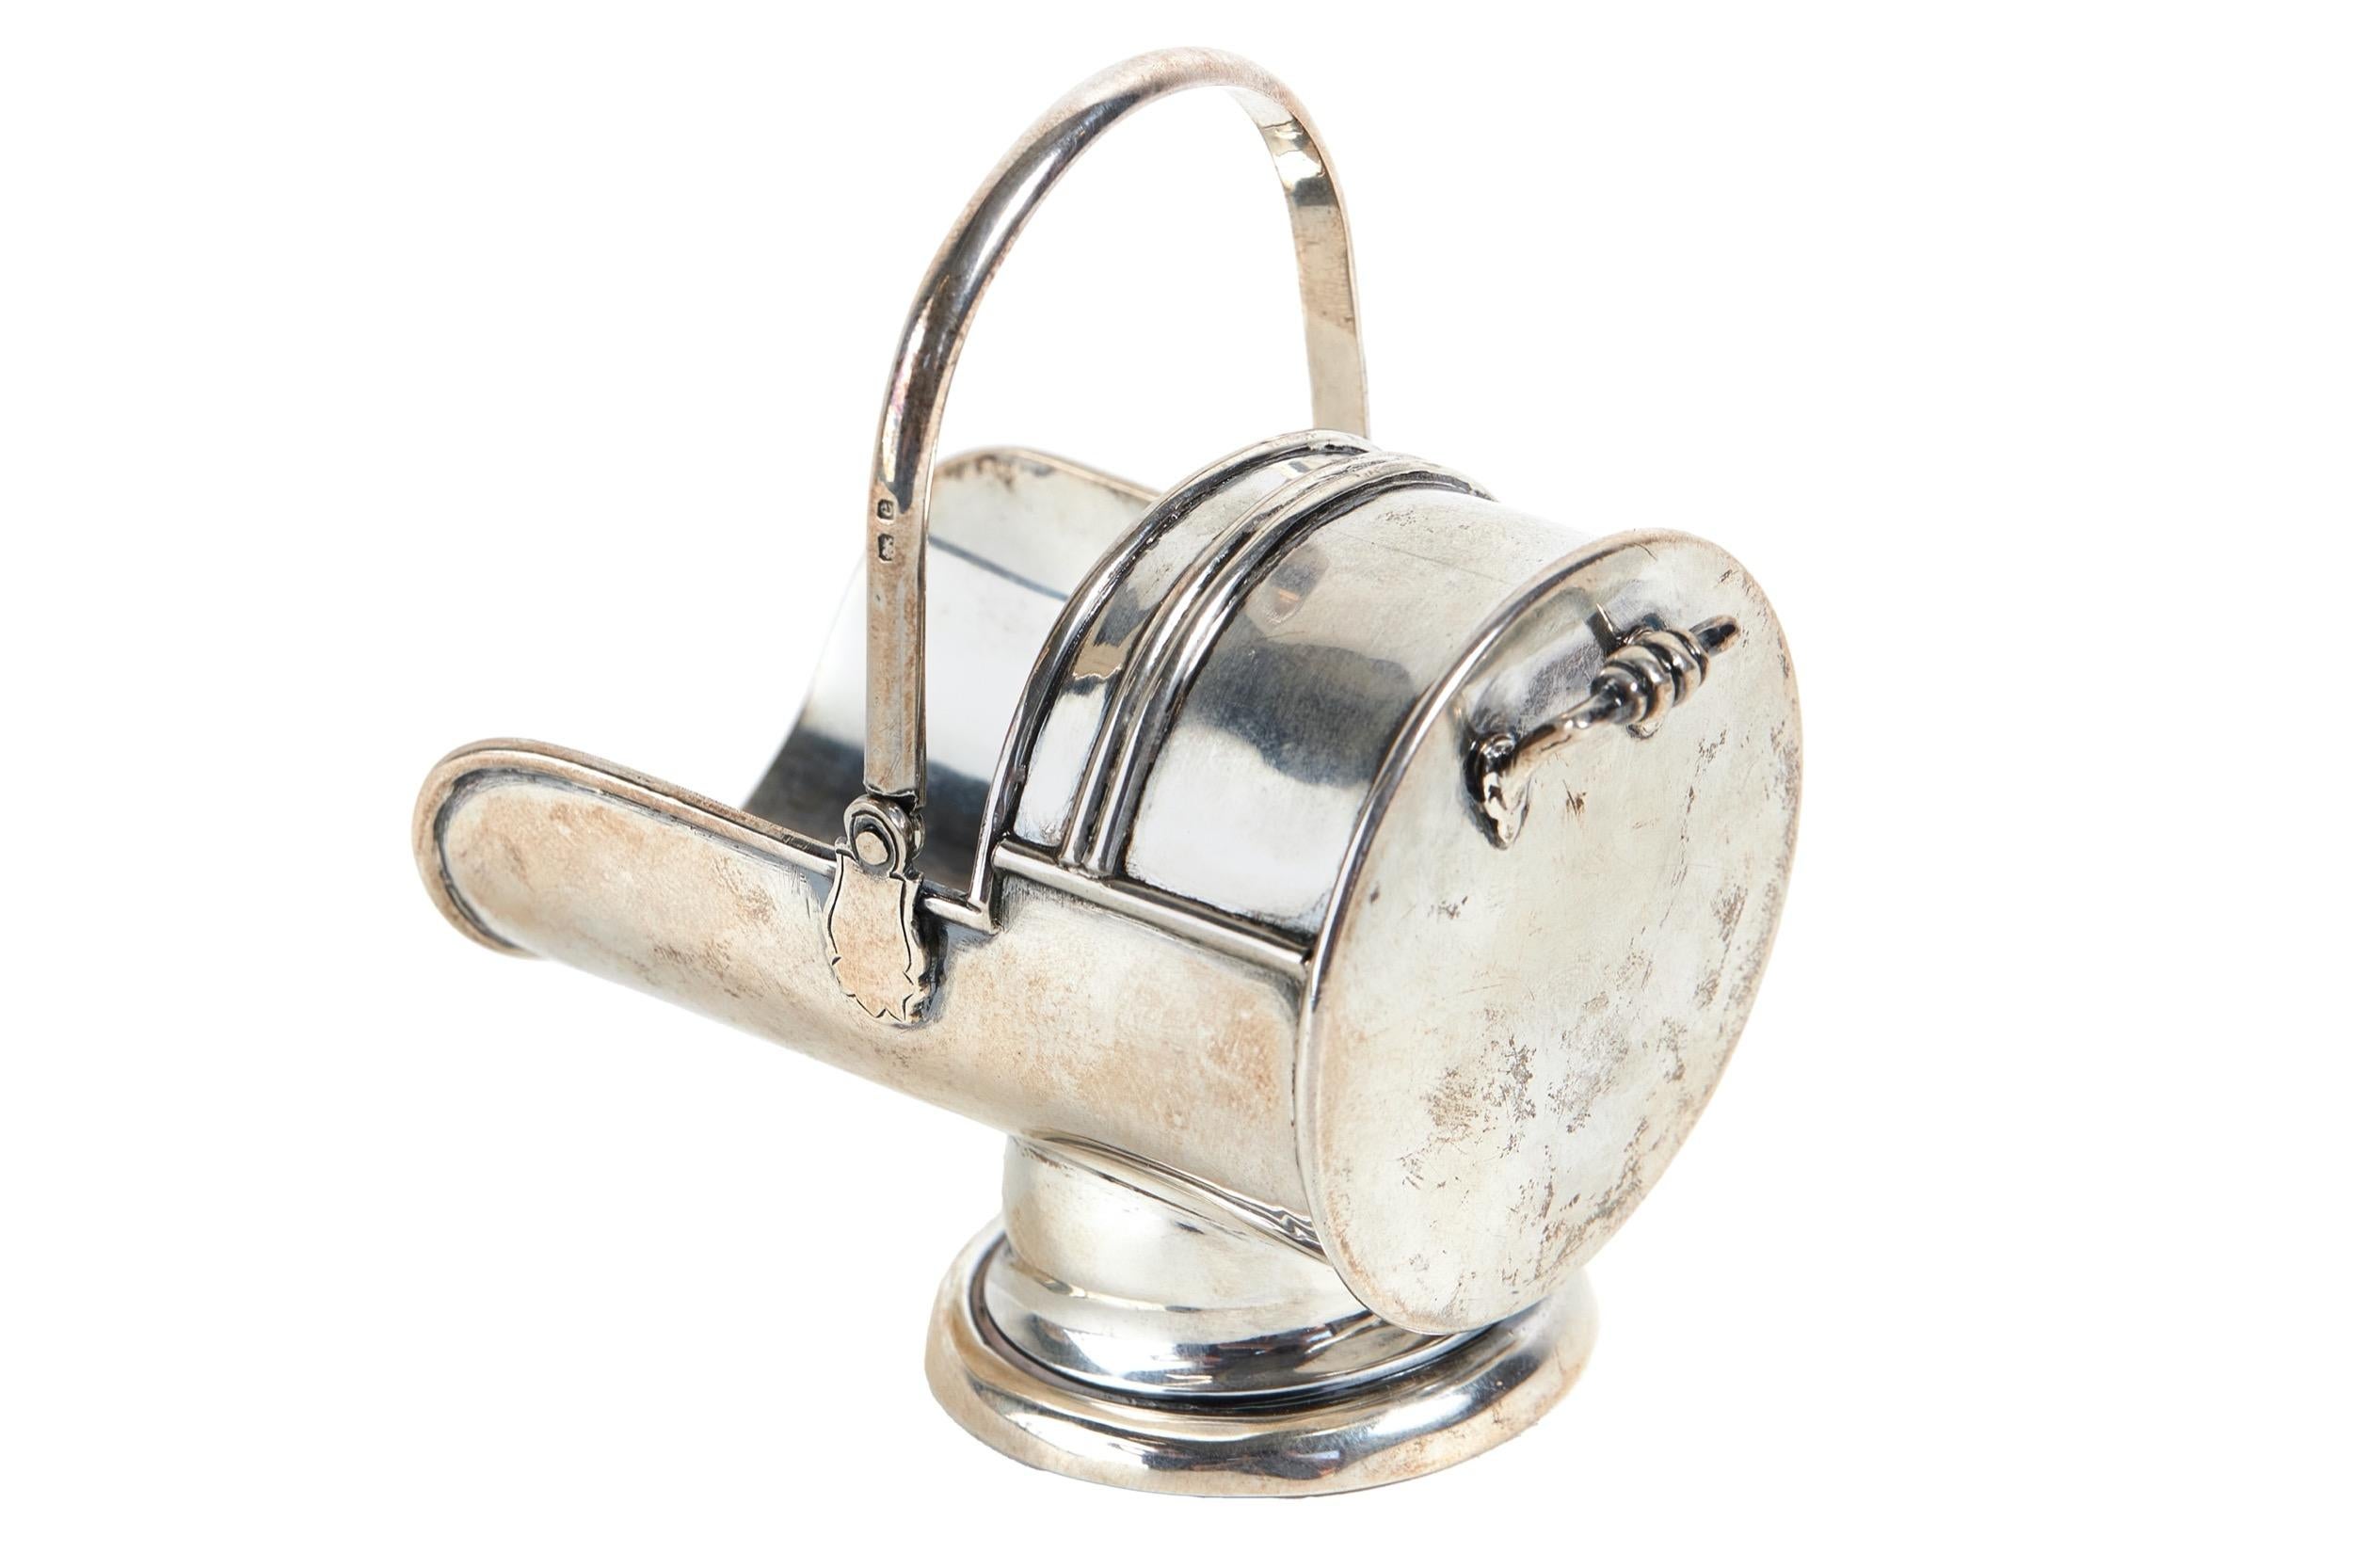 Fine Edwardian Silver novelty  coal Scuttle
Sugar Bowl, 
swing Handle , rolled detail around edges
Fine detail  made by quality silversmith,
Fine Condition No dents, 
Hallmarked Birmingham 1904, makers mark worn